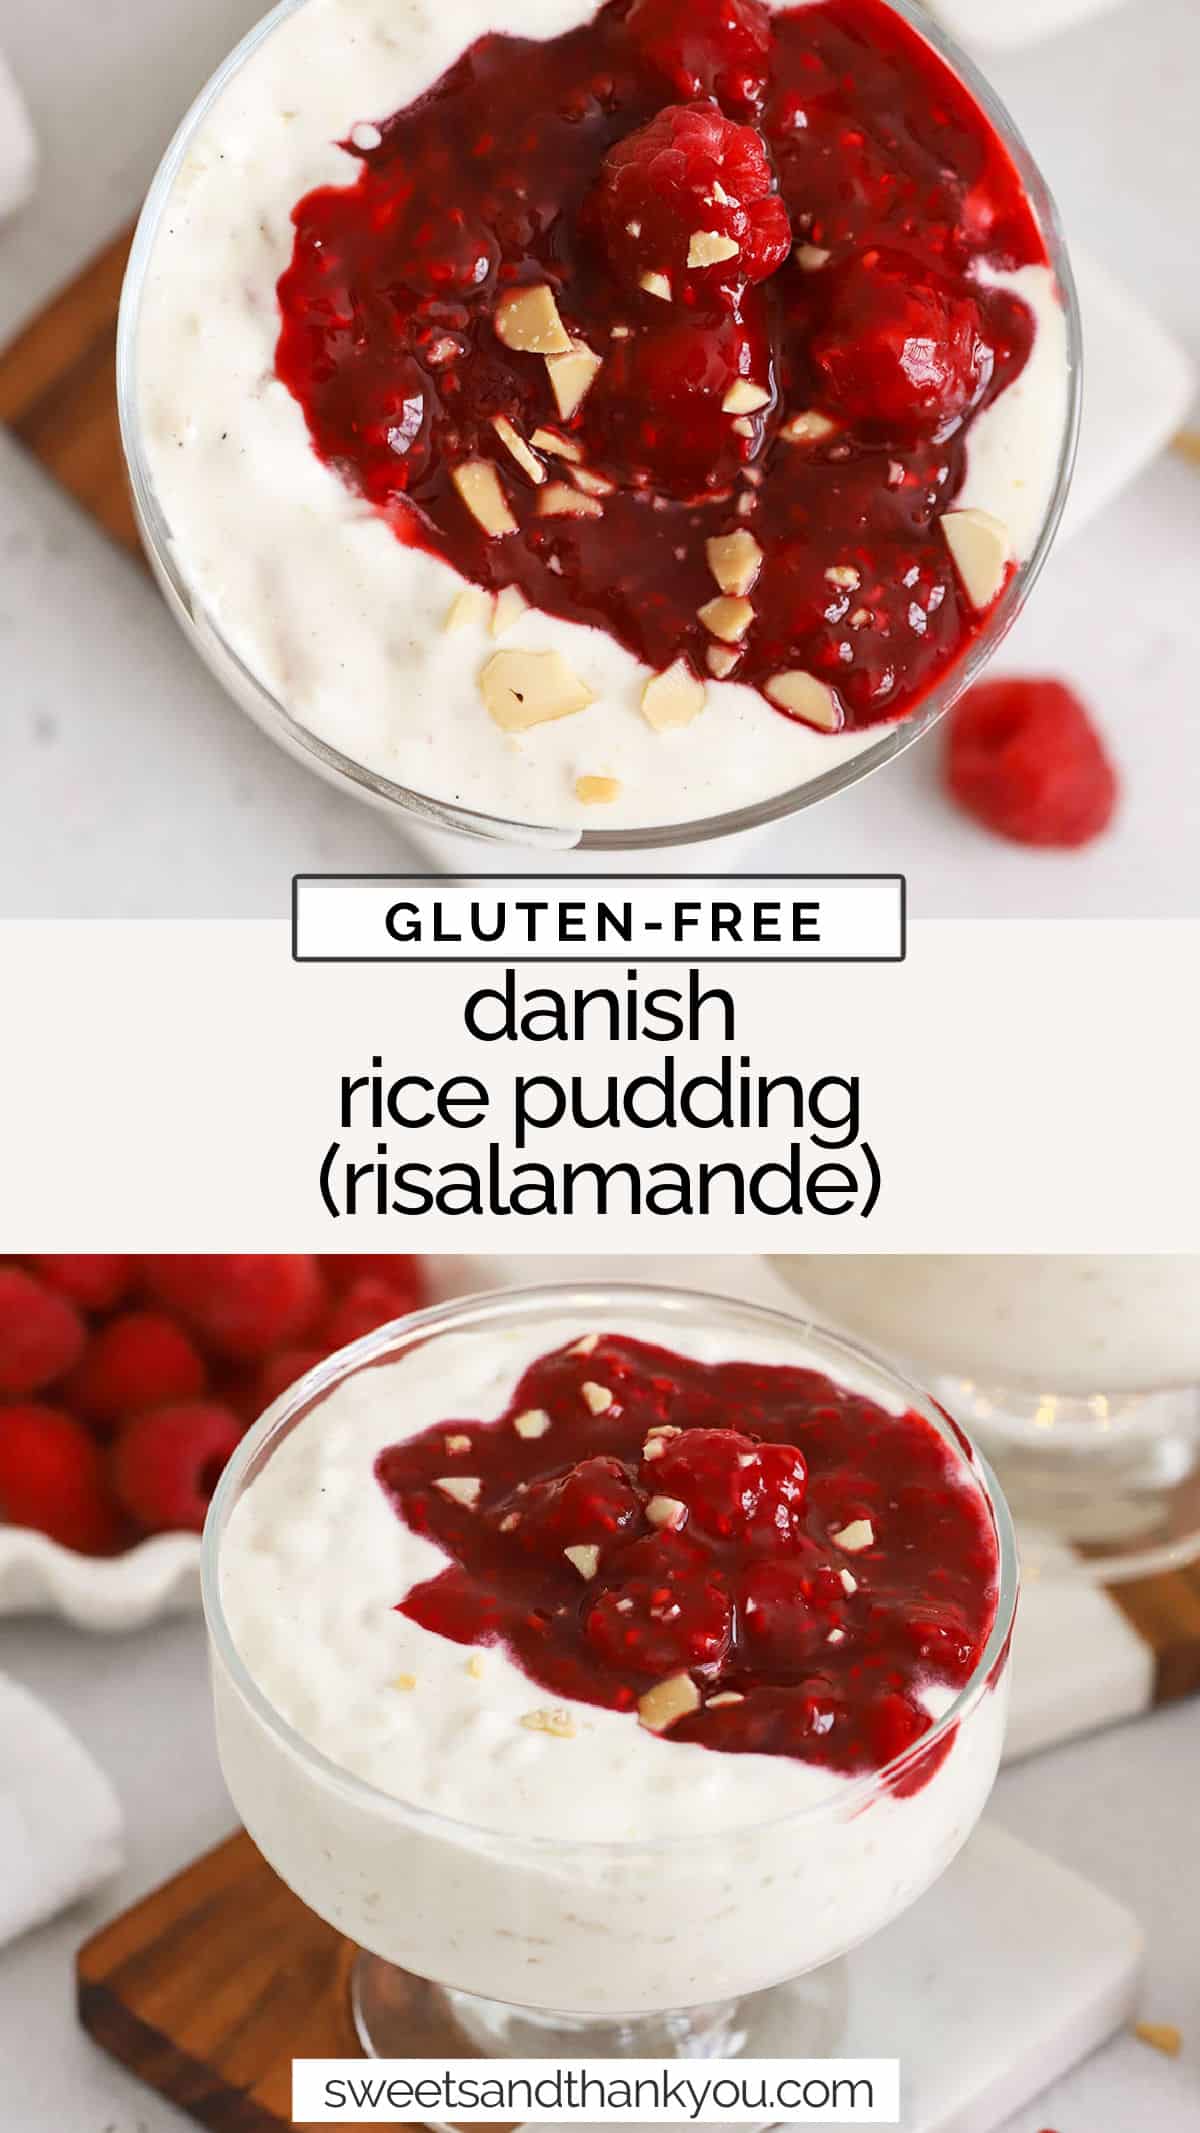 This traditional Danish Rice Pudding recipe (risalamande) is the perfect holiday dessert. Try this rice pudding with raspberry sauce or add cherry sauce! This light, festive risalamande is always a hit for a traditional Christmas Eve dessert or your holiday celebration. (Don't miss learning about the fun game you play to win the almond present when eating it!) It's the perfect gluten-free dessert to add to your Christmas dinner. 